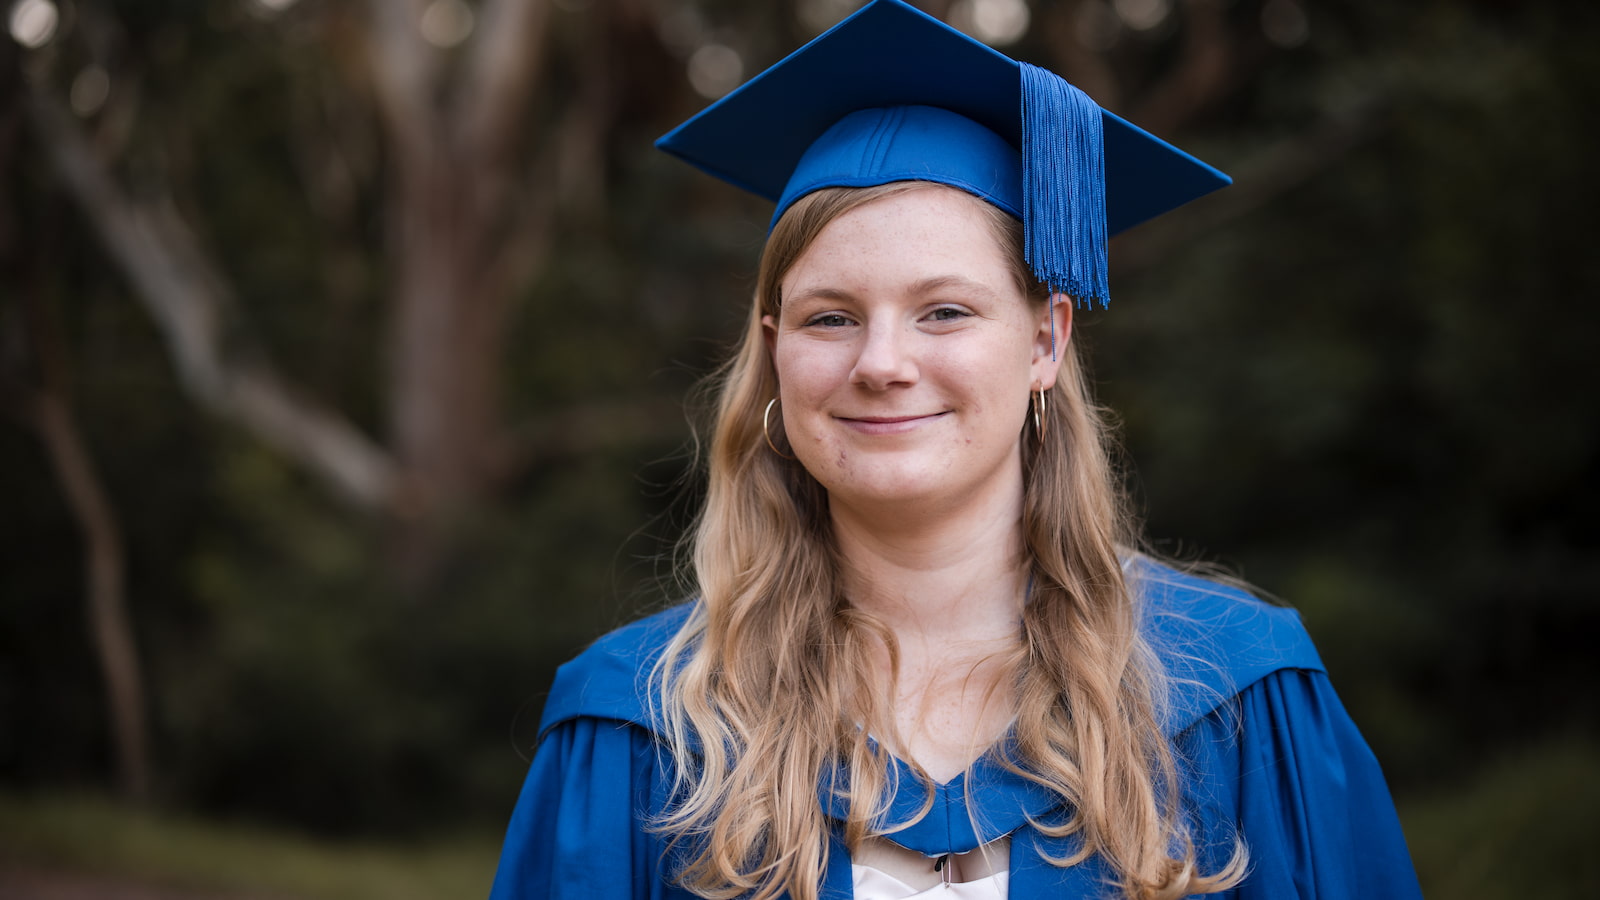 Elizabeth Caine has a smile on her face and wears a graduation gown and cap. Photo: Michael Gray